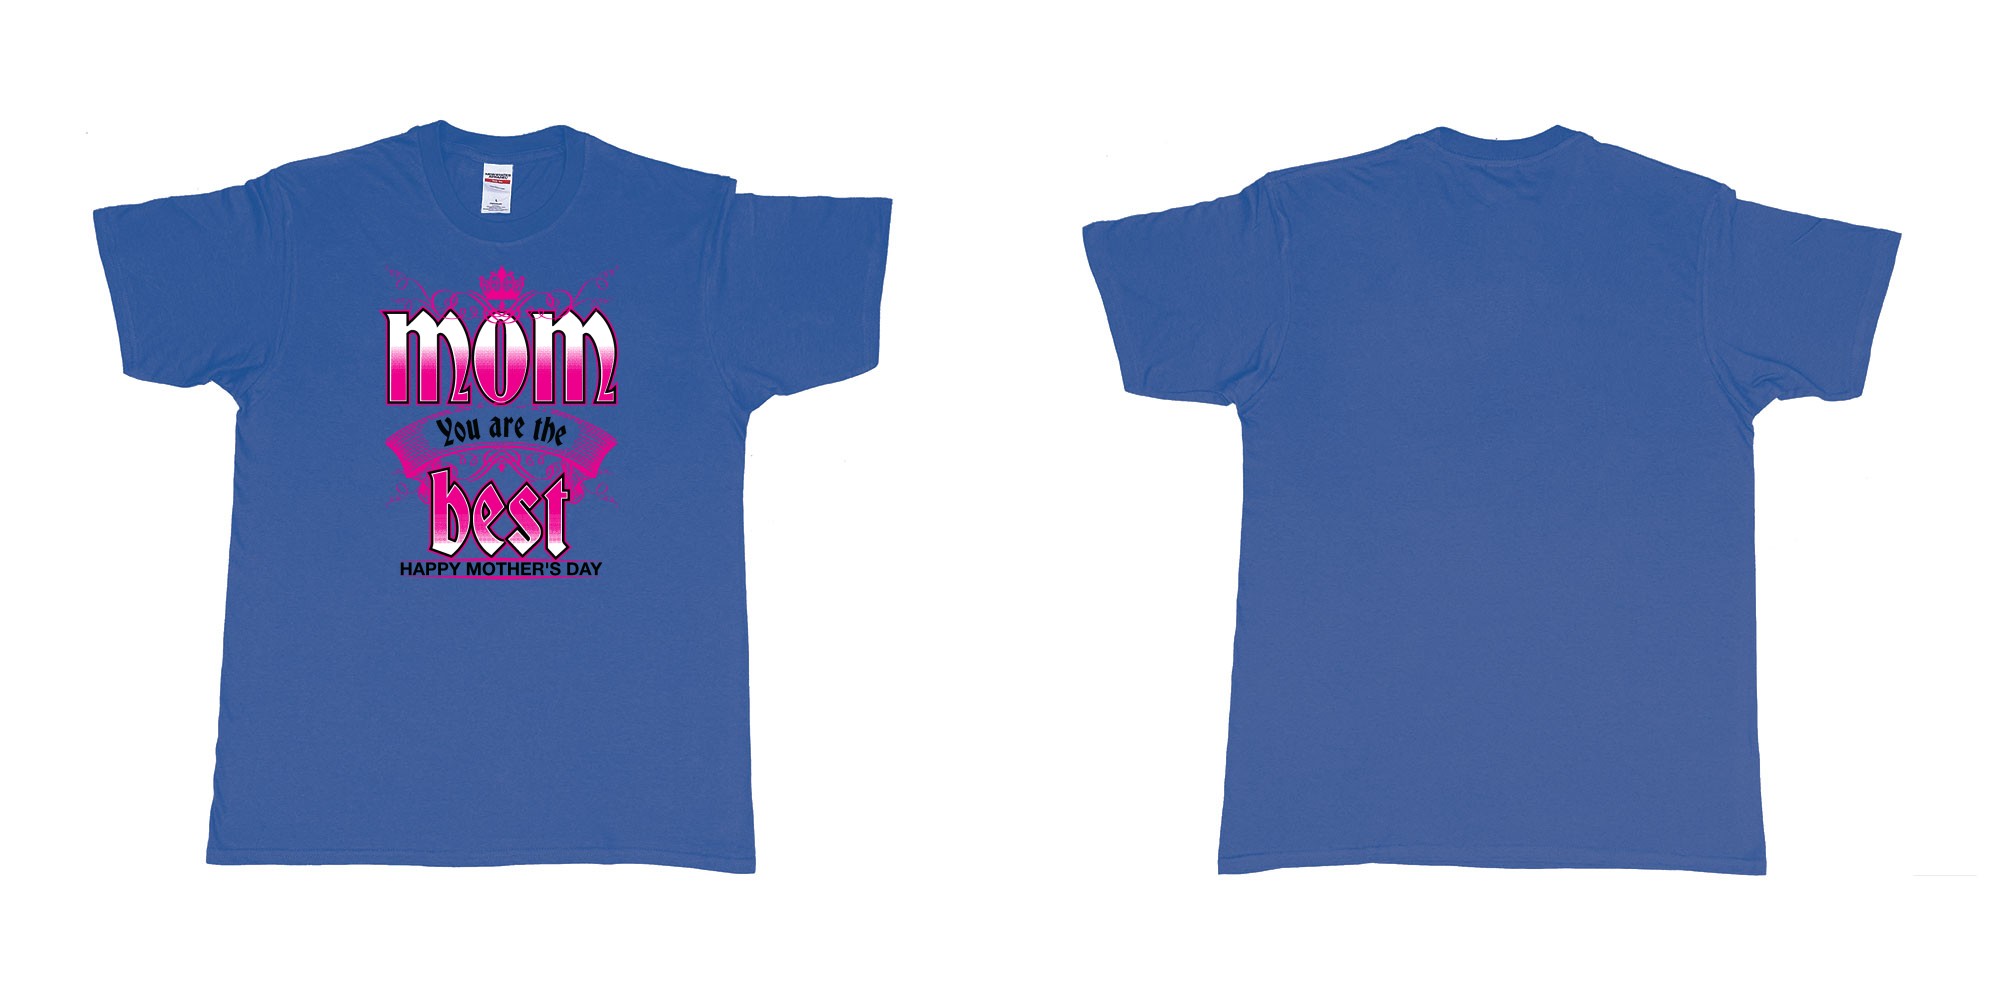 Custom tshirt design crown mom you are the best happy morthers day in fabric color royal-blue choice your own text made in Bali by The Pirate Way